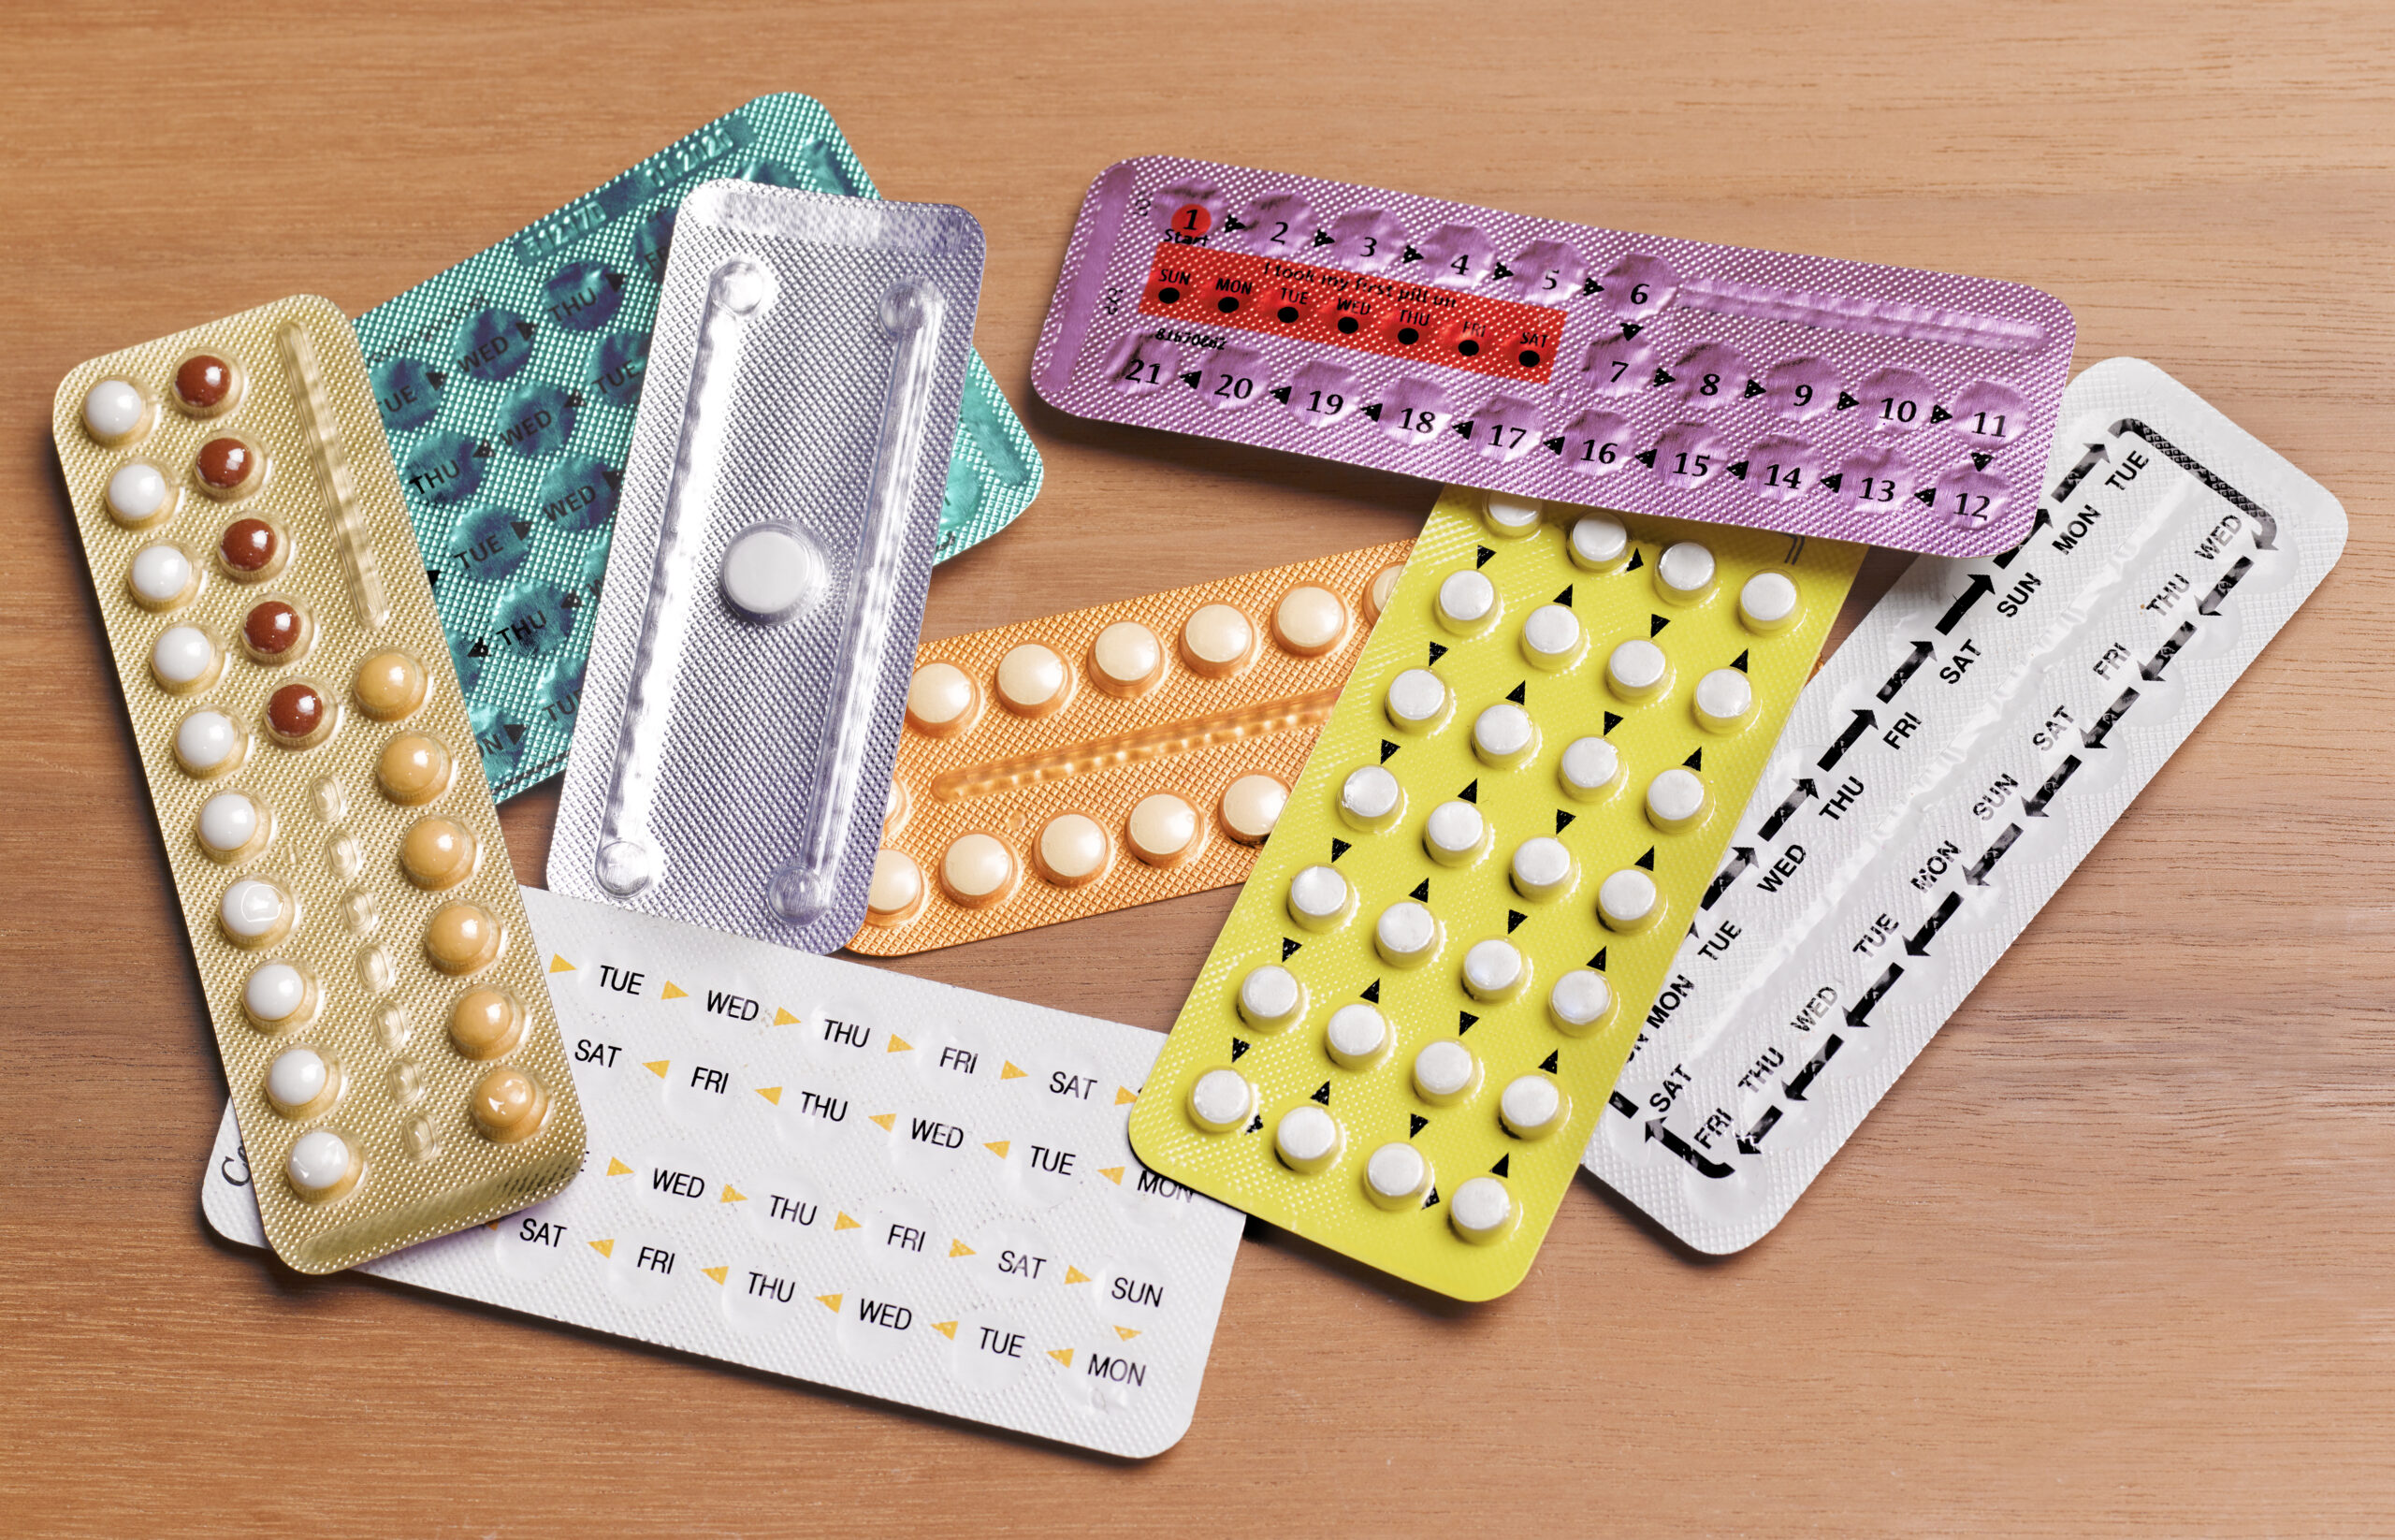 Packs of colorful birth control pills on top of each other (Peter Dazeley/The Image Bank via Getty Images)